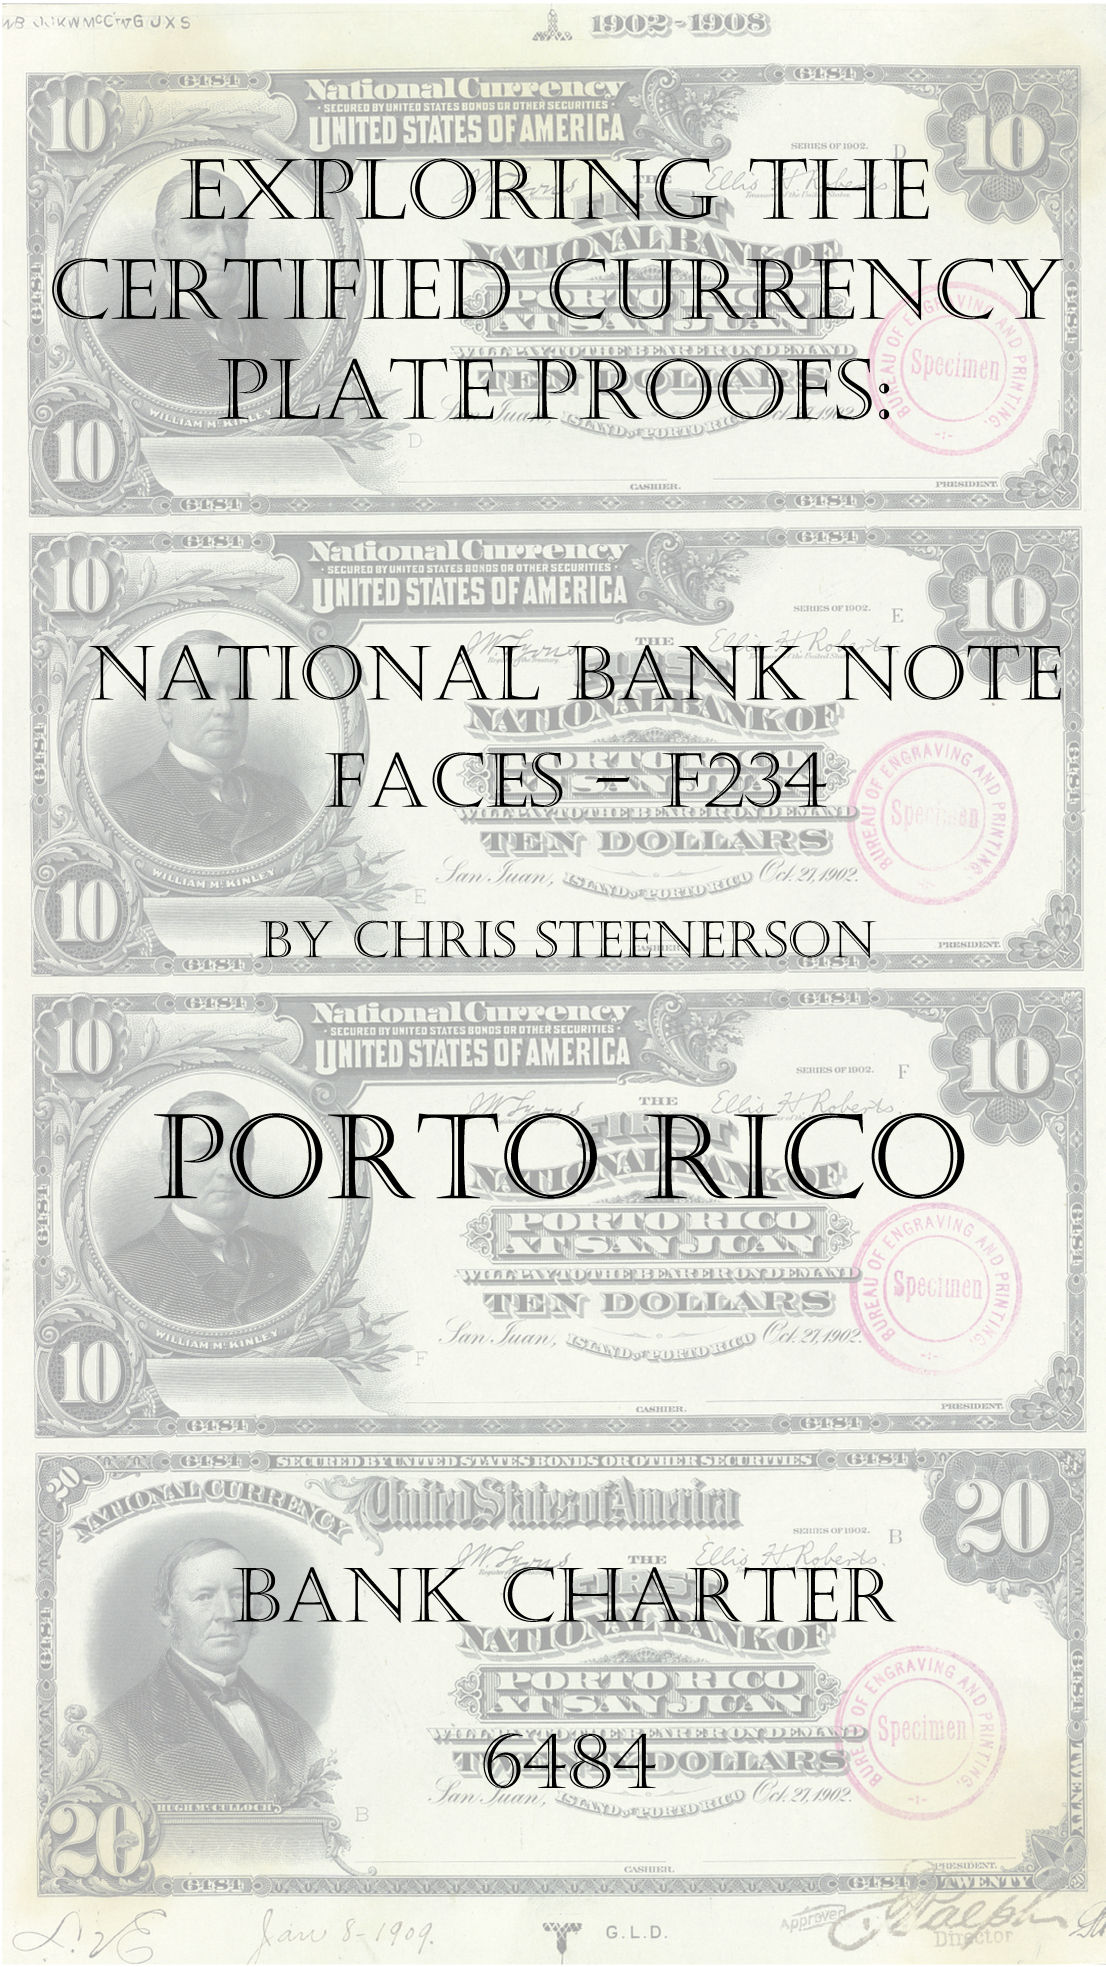 Porto Rico National Bank Note Currency Proofs